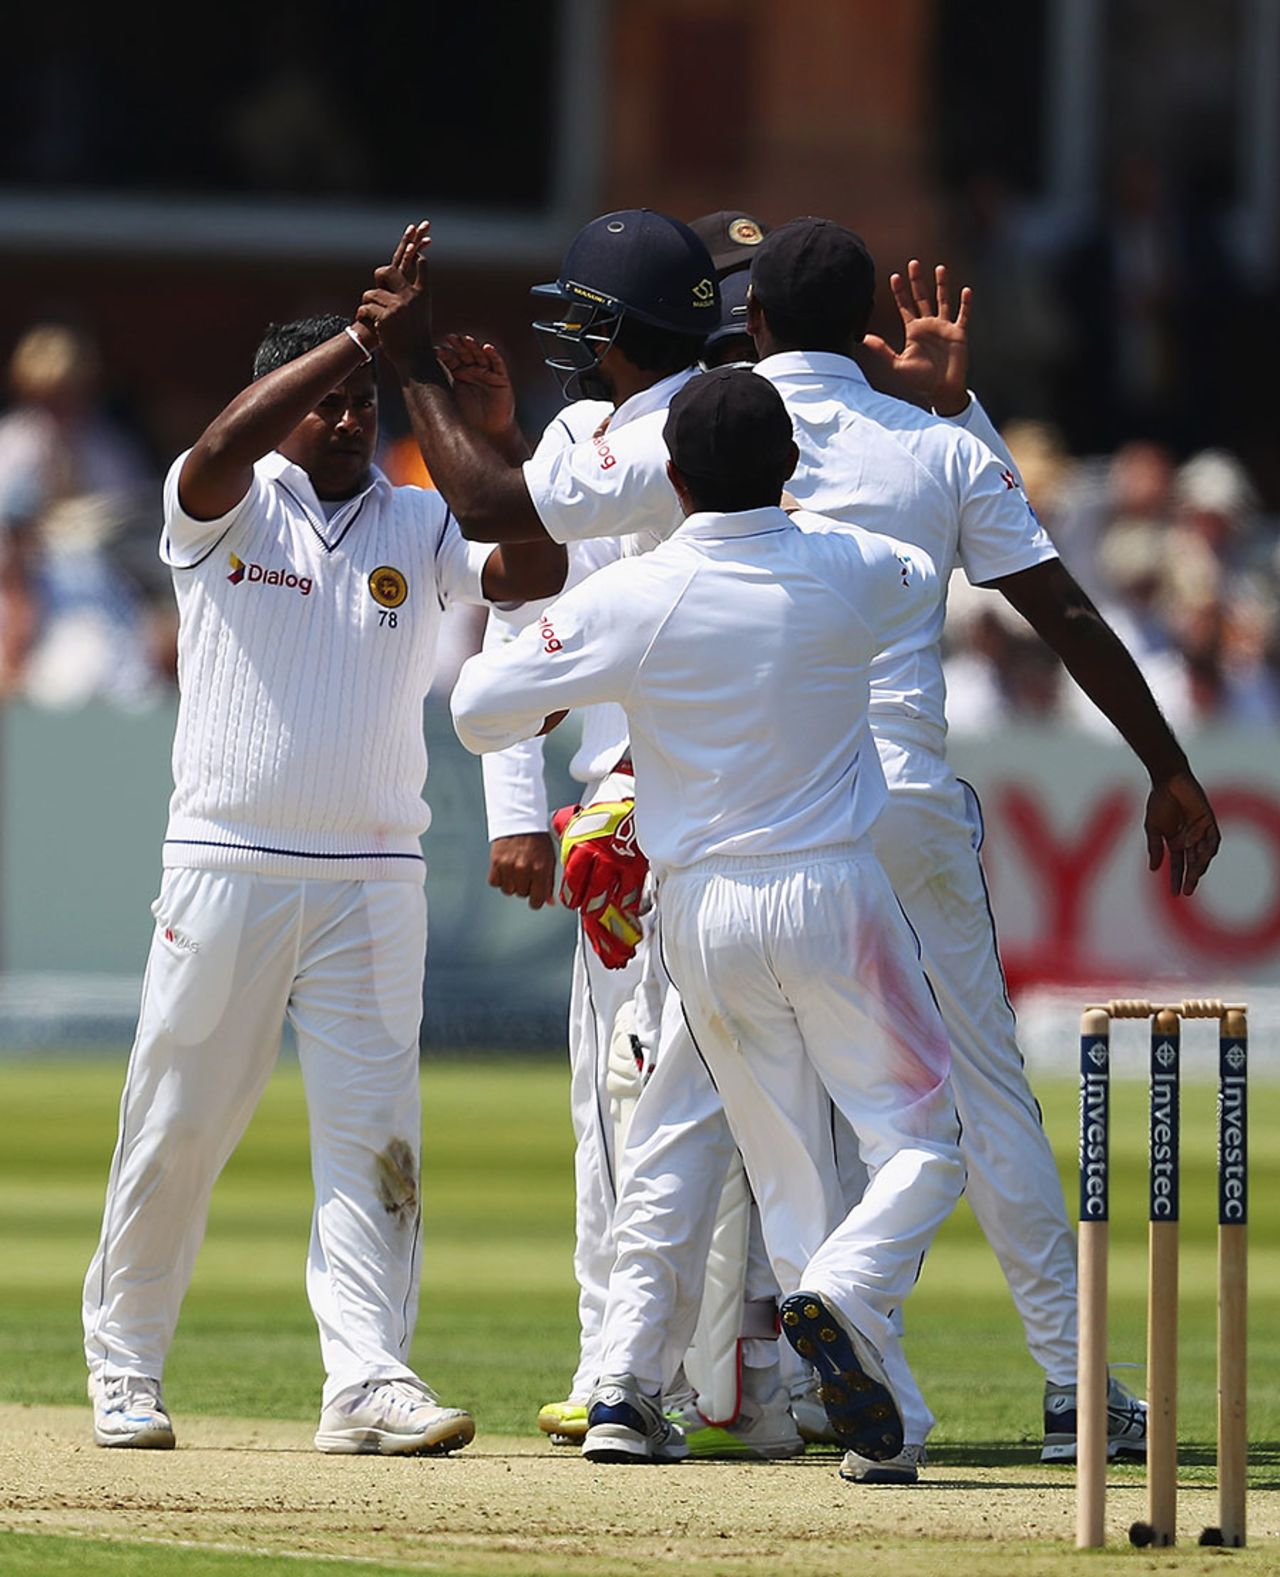 Rangana Herath struck with his fourth ball as Alex Hales was caught at slip, England v Sri Lanka, 3rd Investec Test, Lord's, 1st day, June 9, 2016